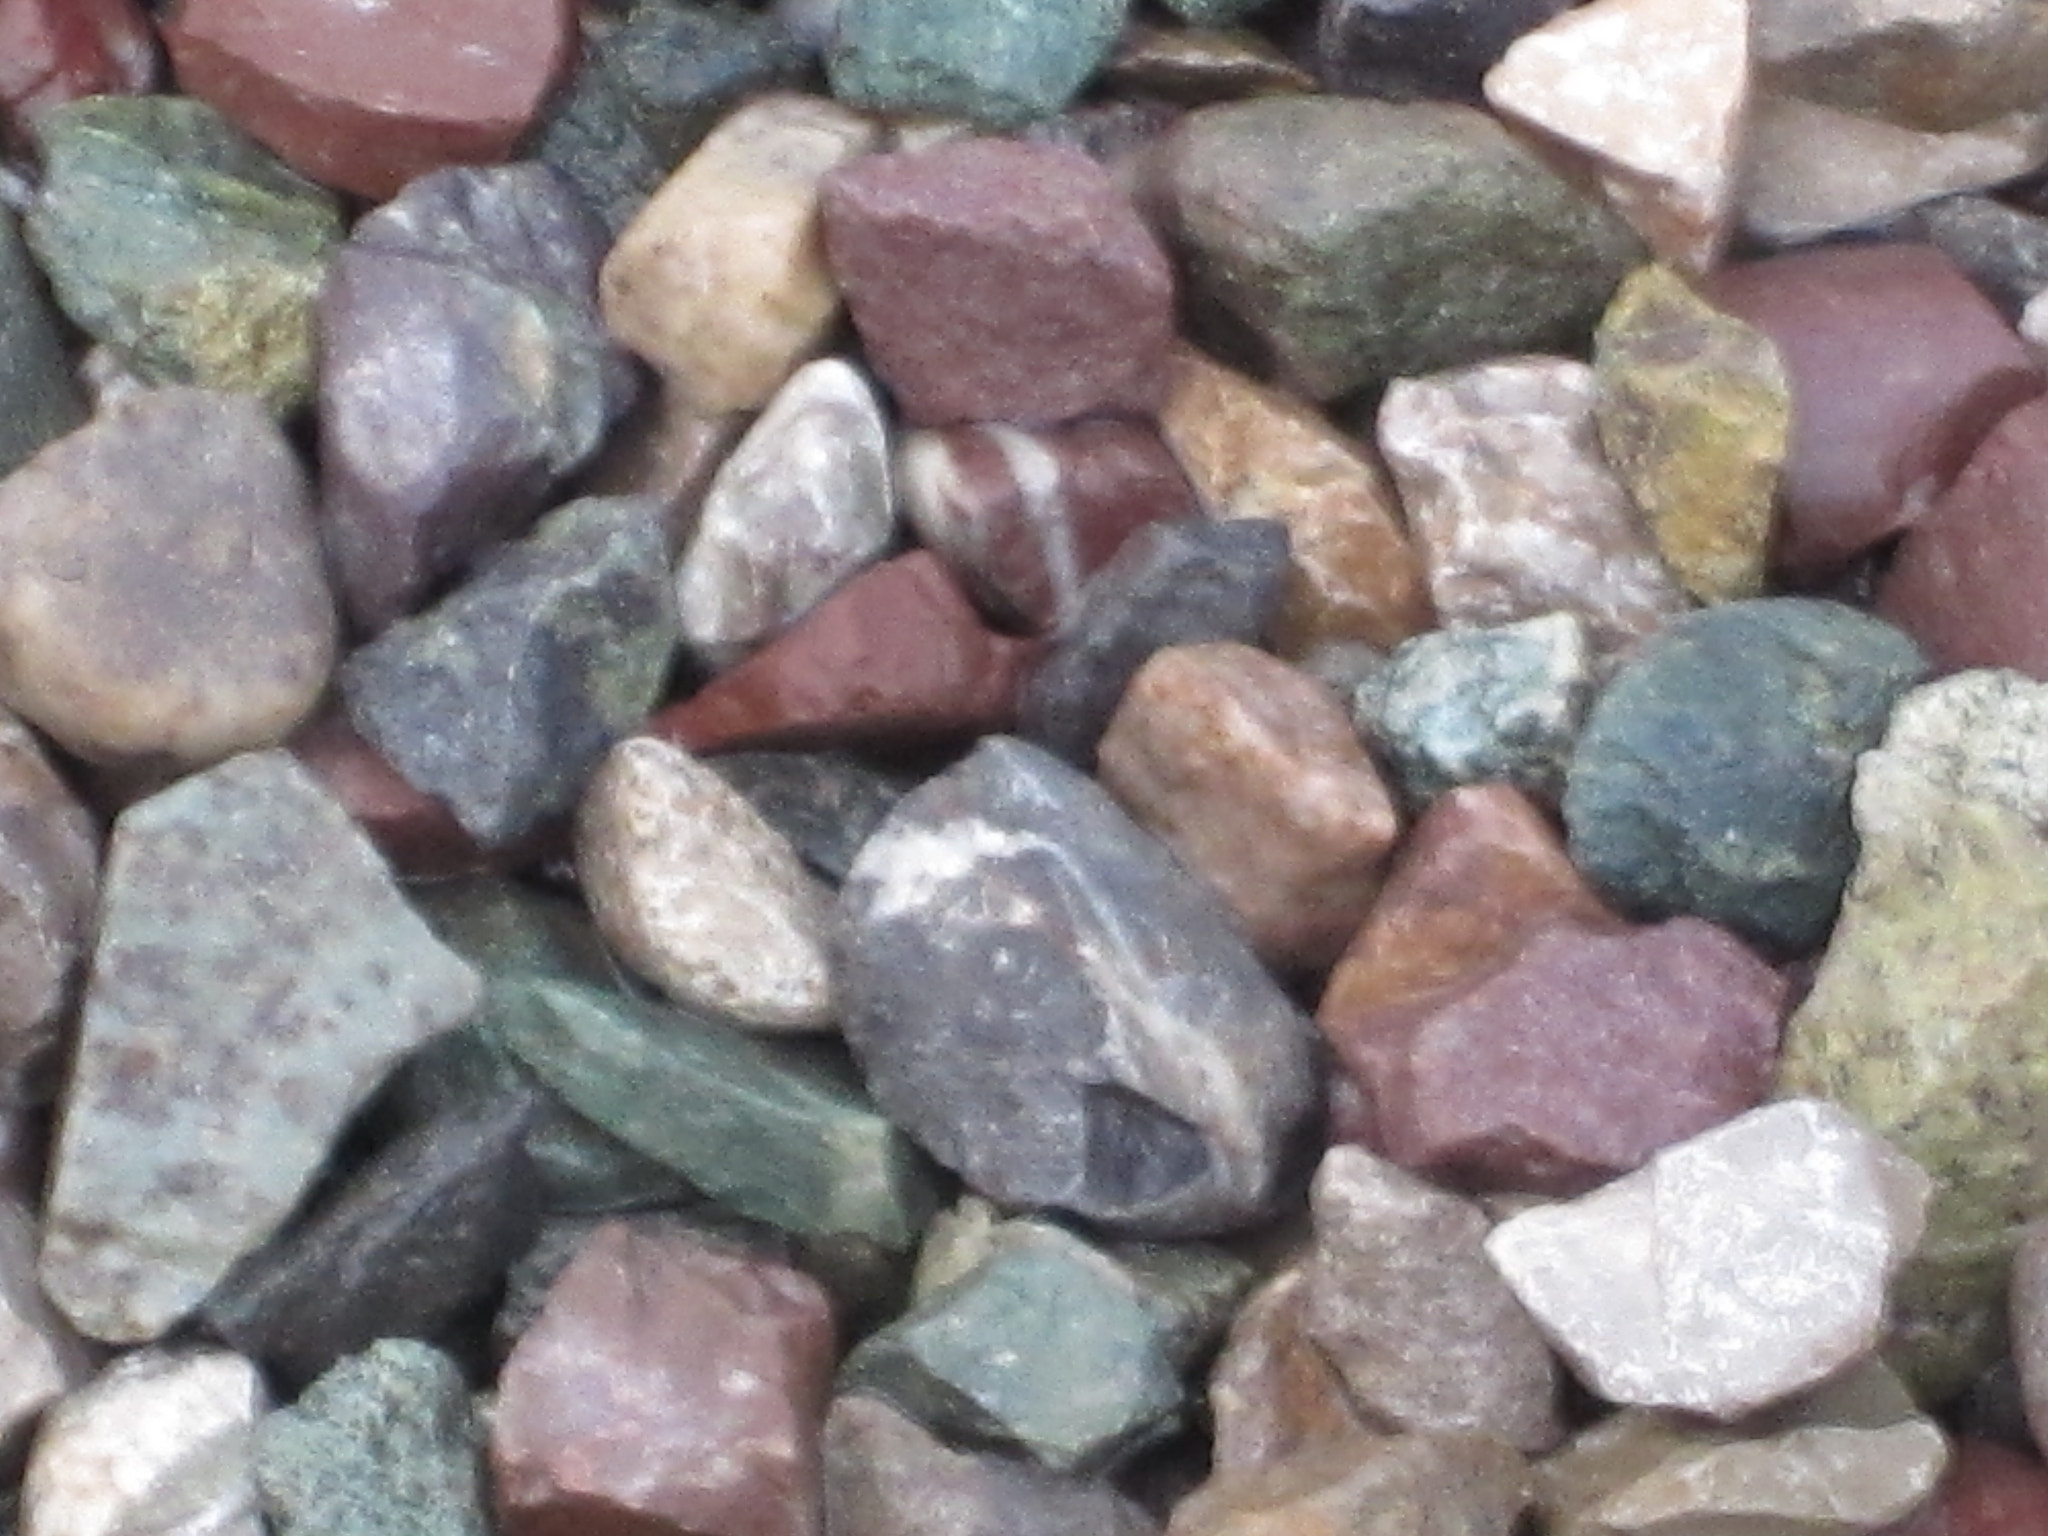 Canon PowerShot ELPH 300 HS (IXUS 220 HS / IXY 410F) sample photo. Just a picture of rocks, sorry! photography